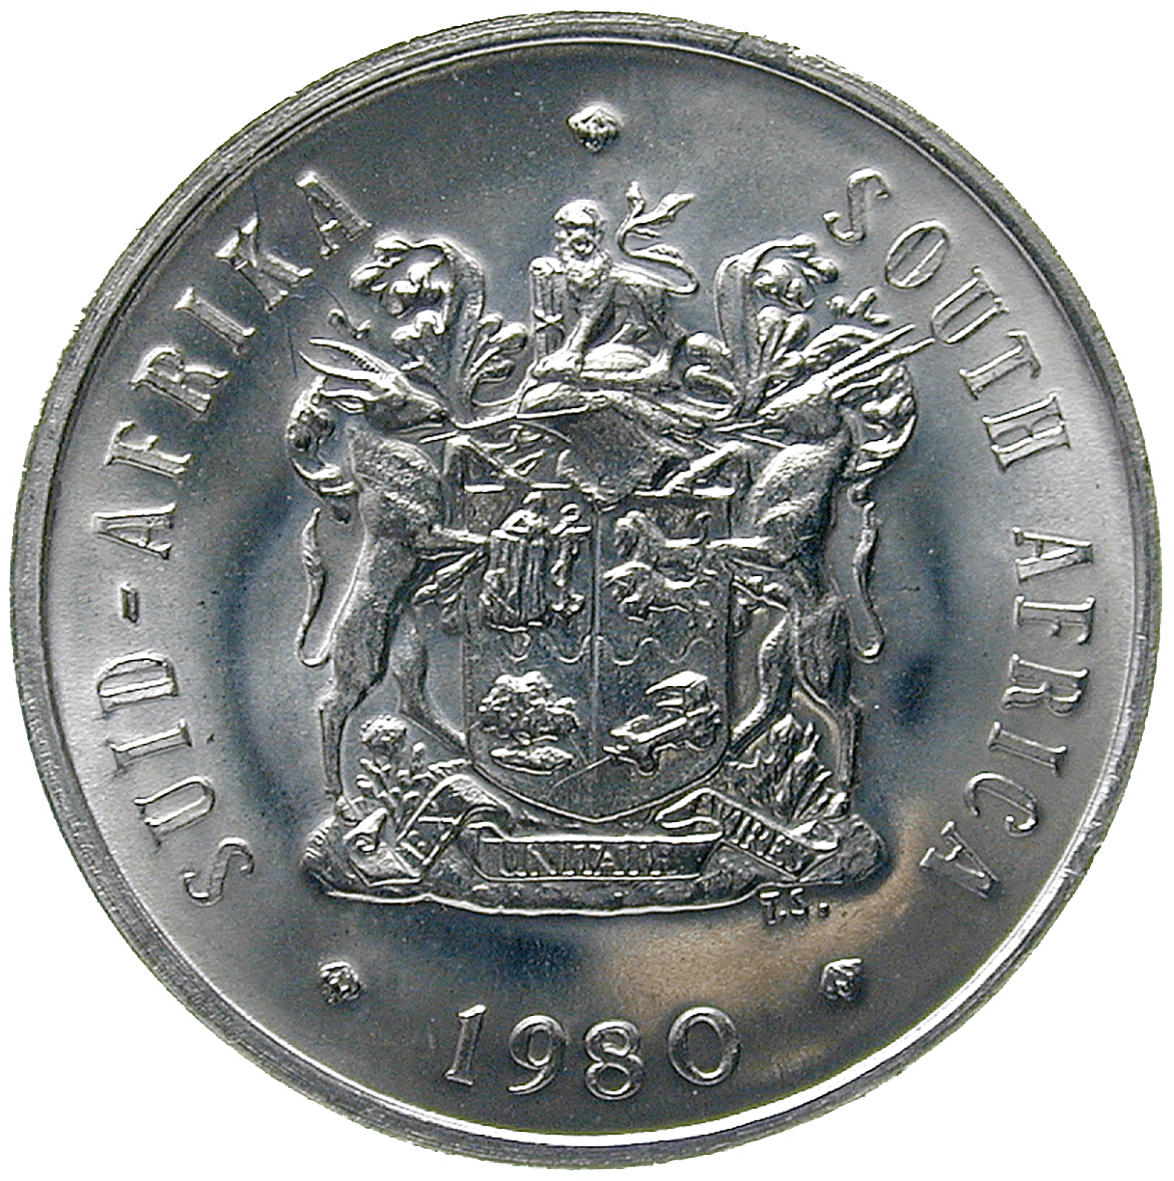 Republic of South Africa, 20 Cents 1980 (obverse)